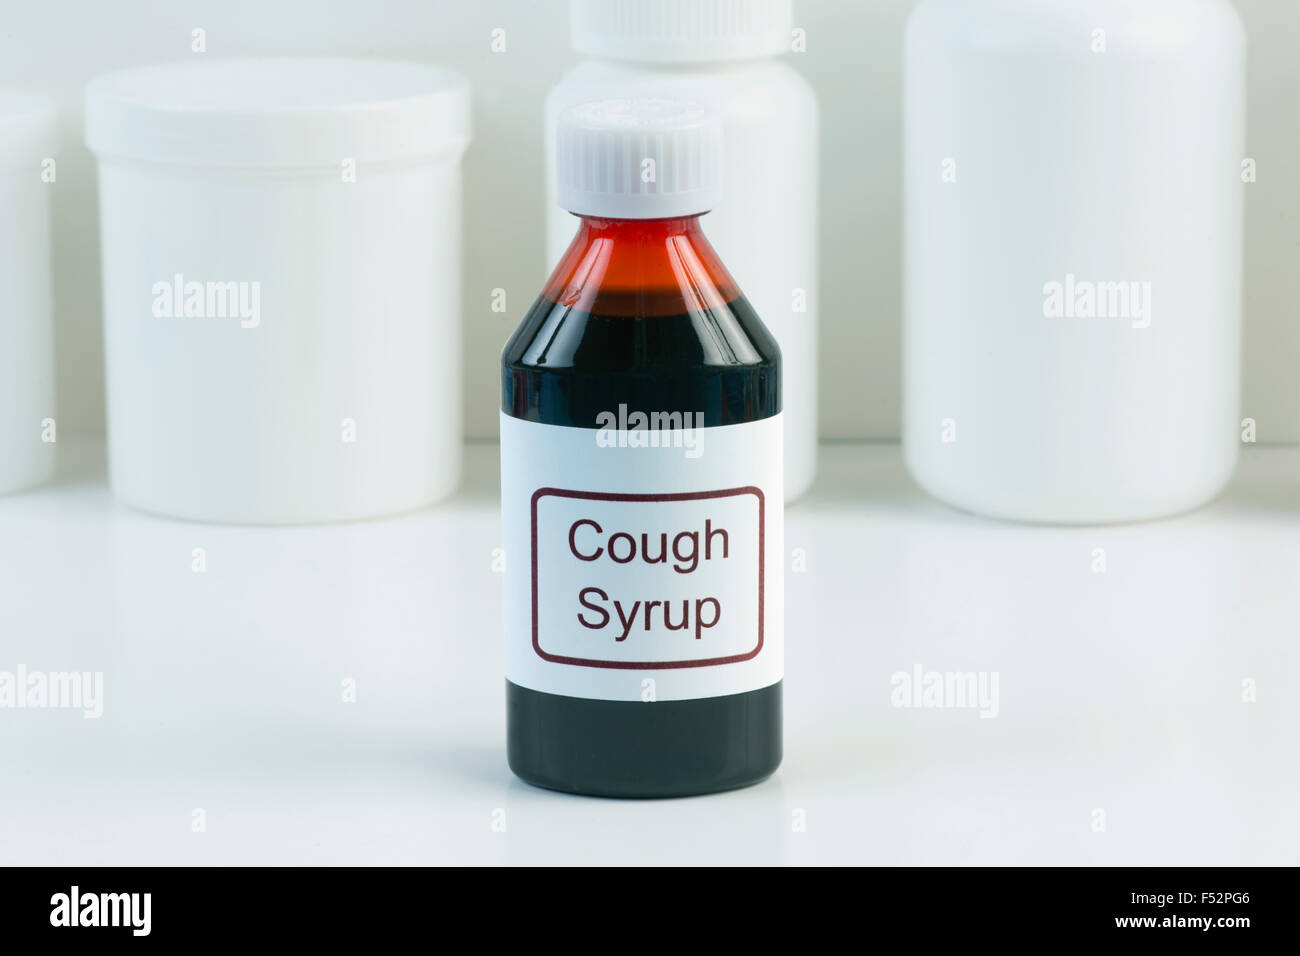 Cough medicine in amber bottle with white containers in background. Stock Photo